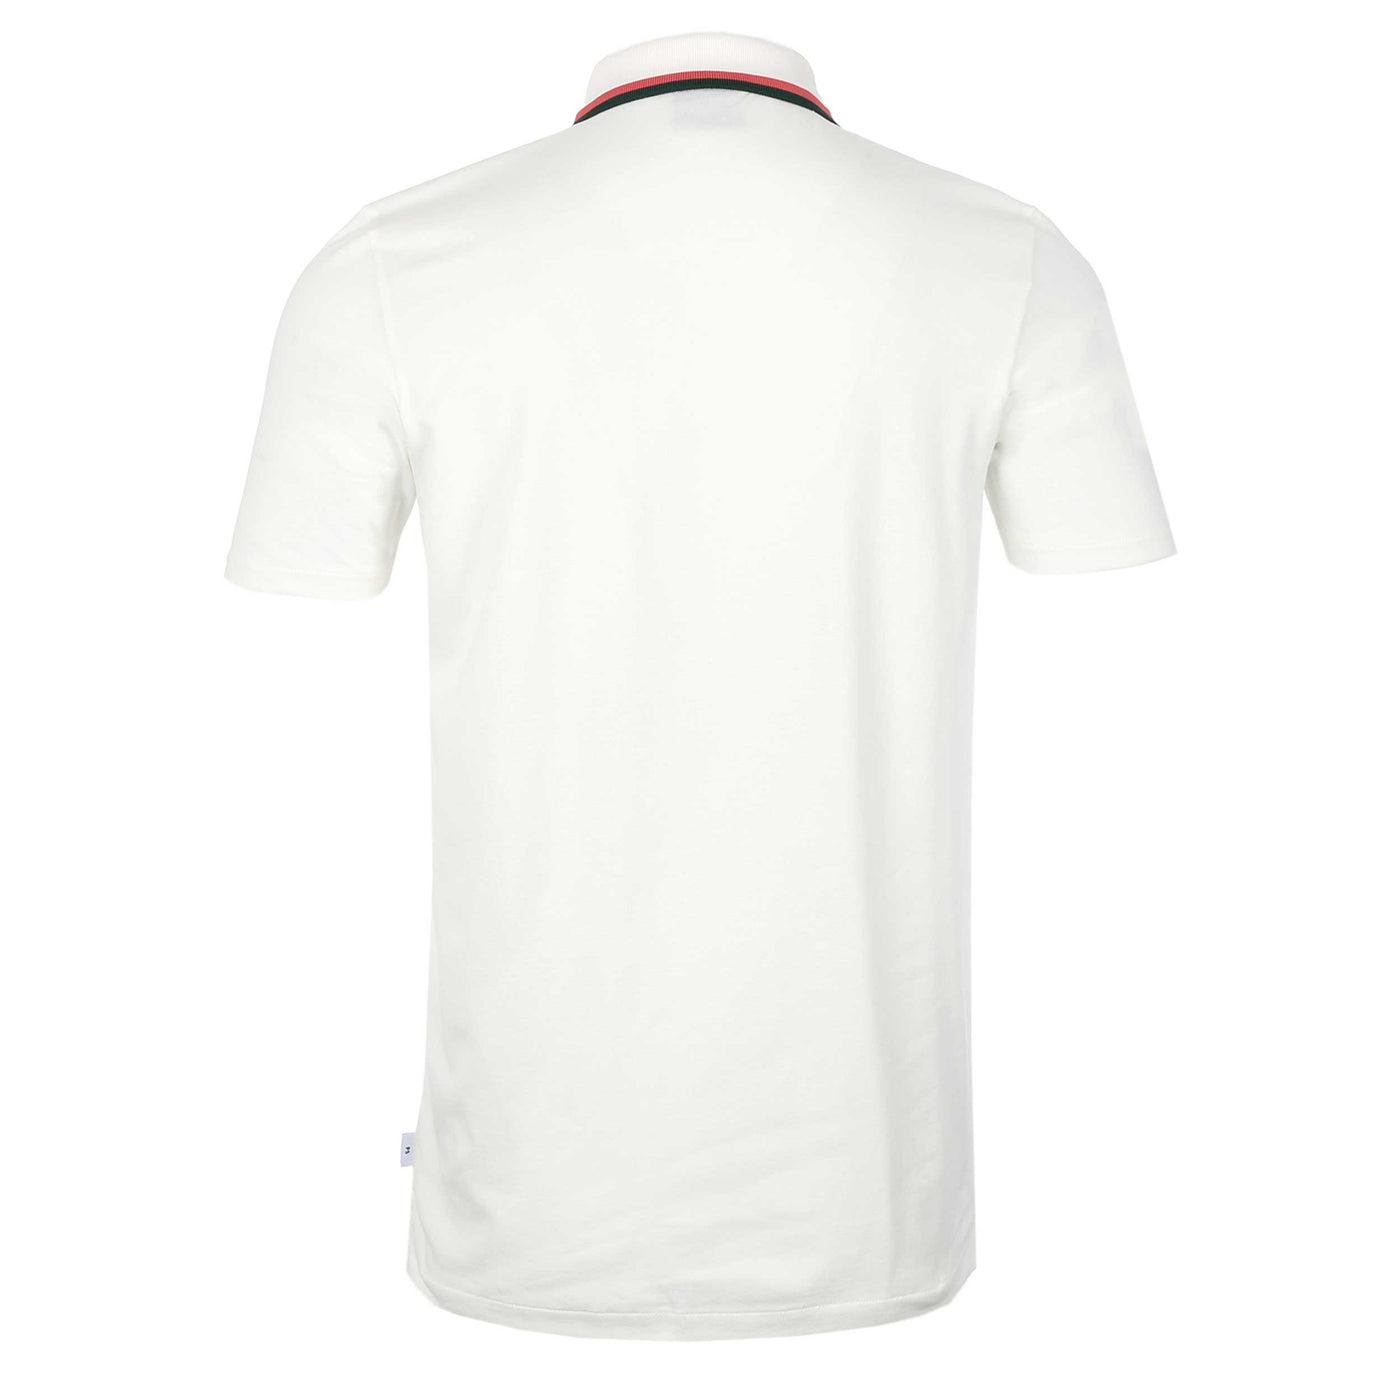 Paul Smith Zip Polo Shirt in White Back